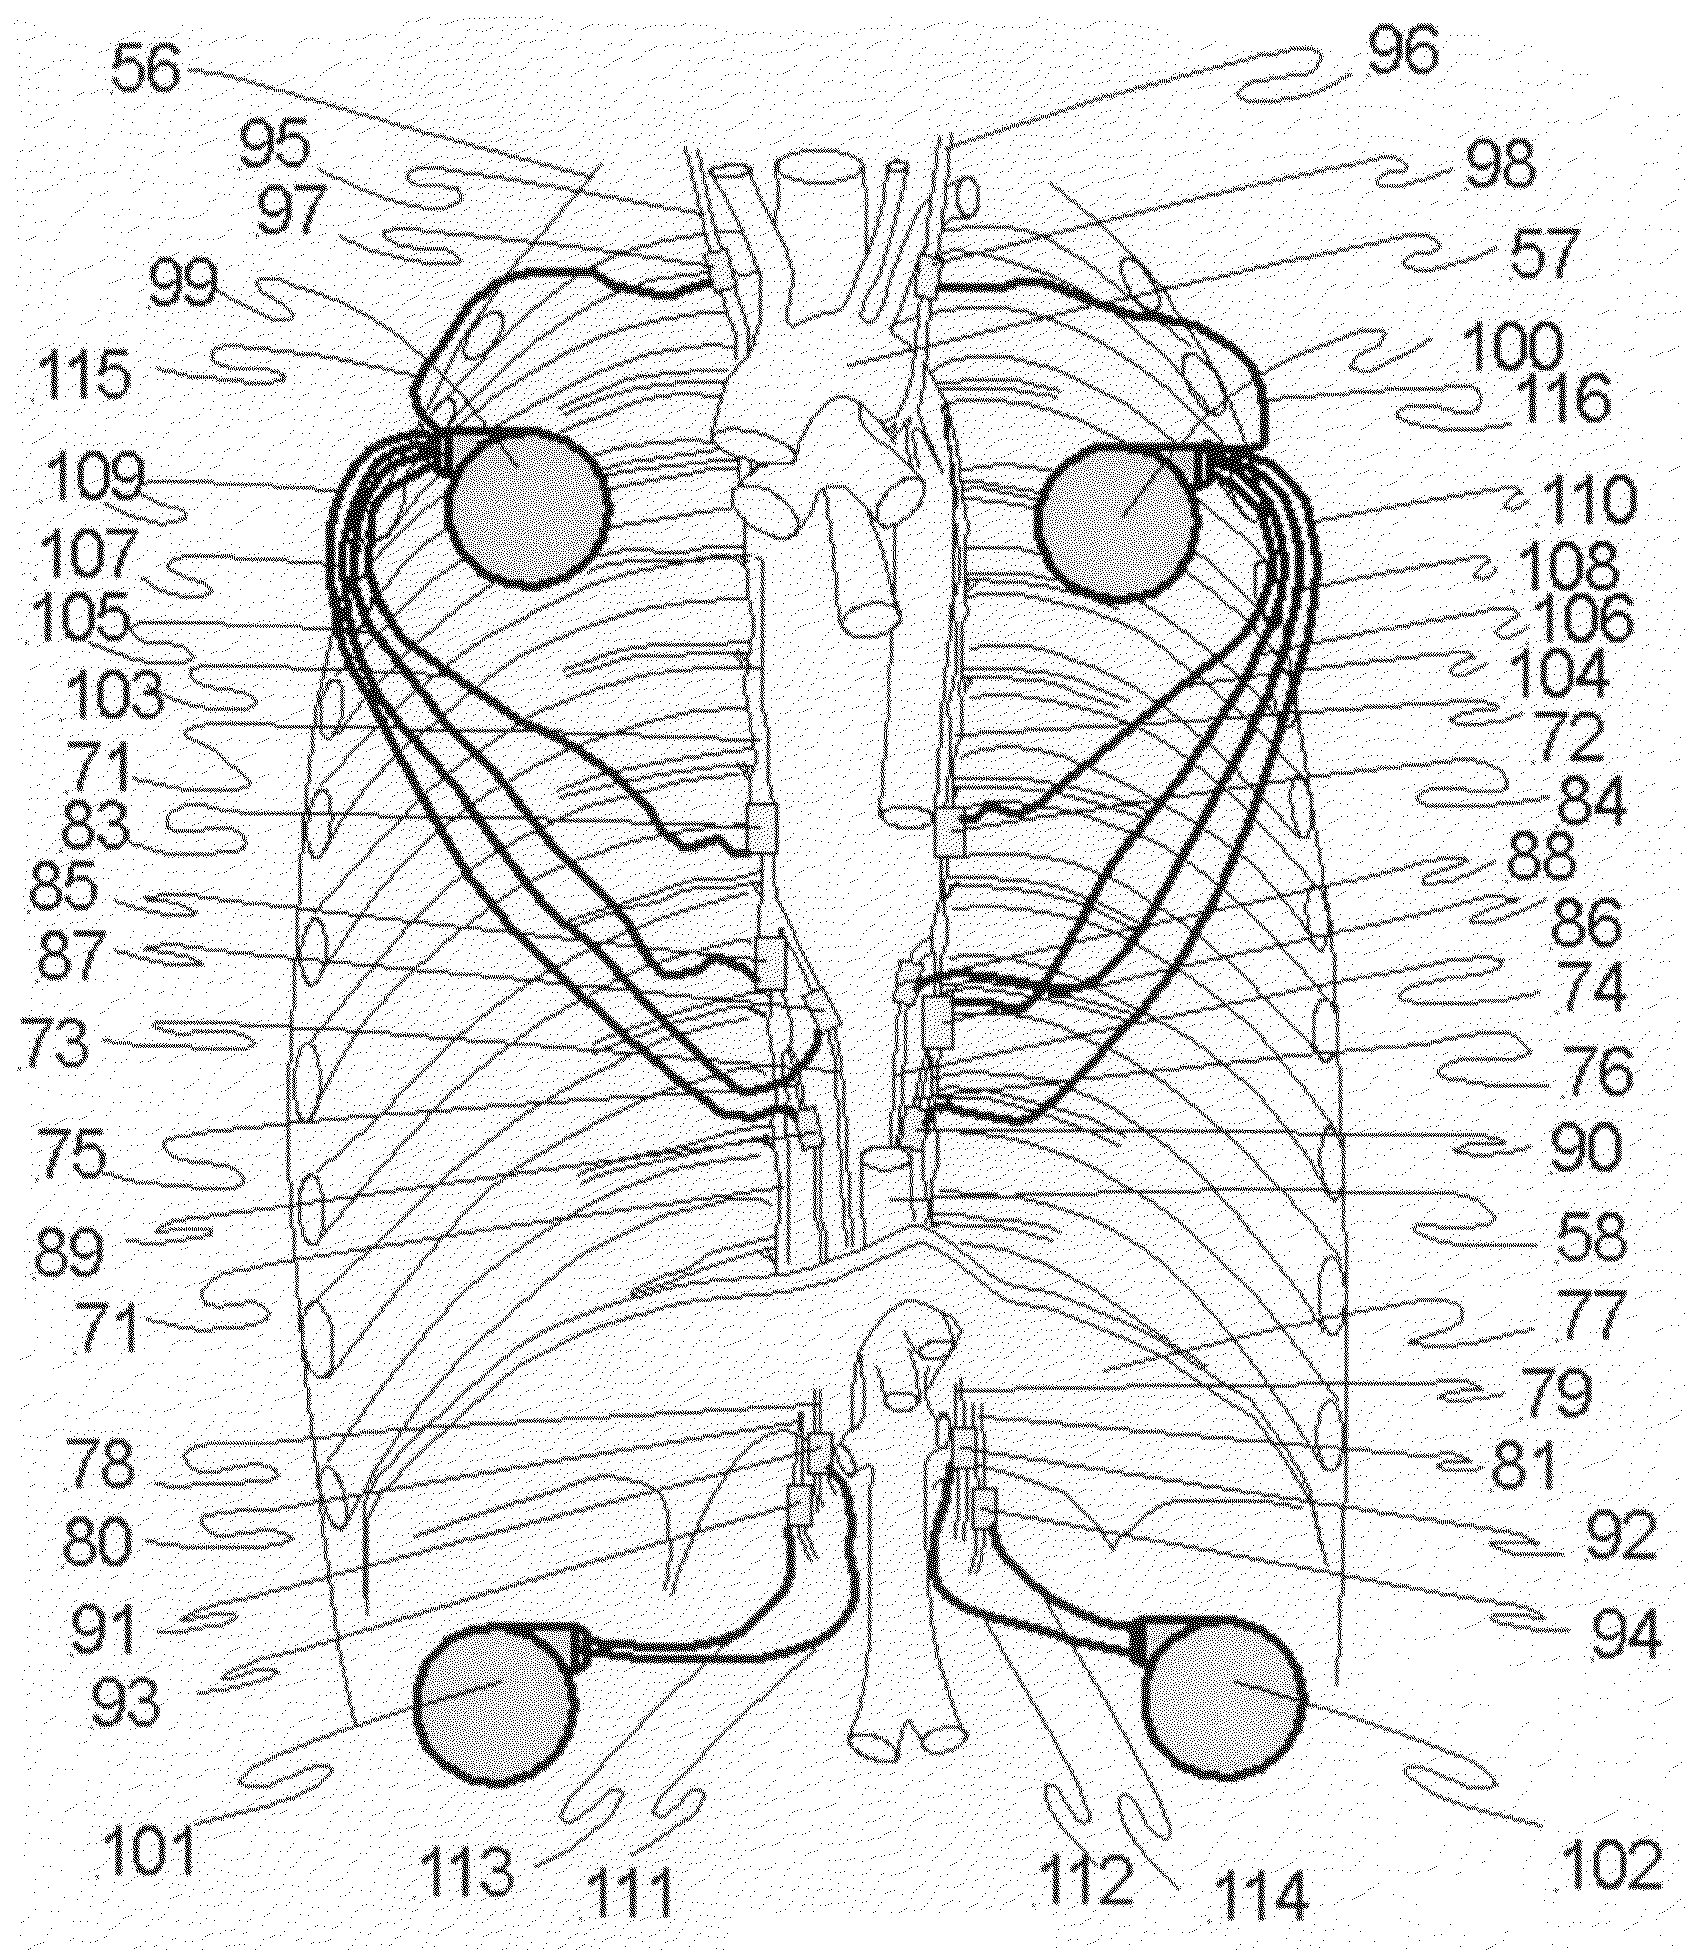 Methods and apparatus for neuromodulation and physiologic modulation for the treatment of obesity and metabolic and neuropsychiatric disease